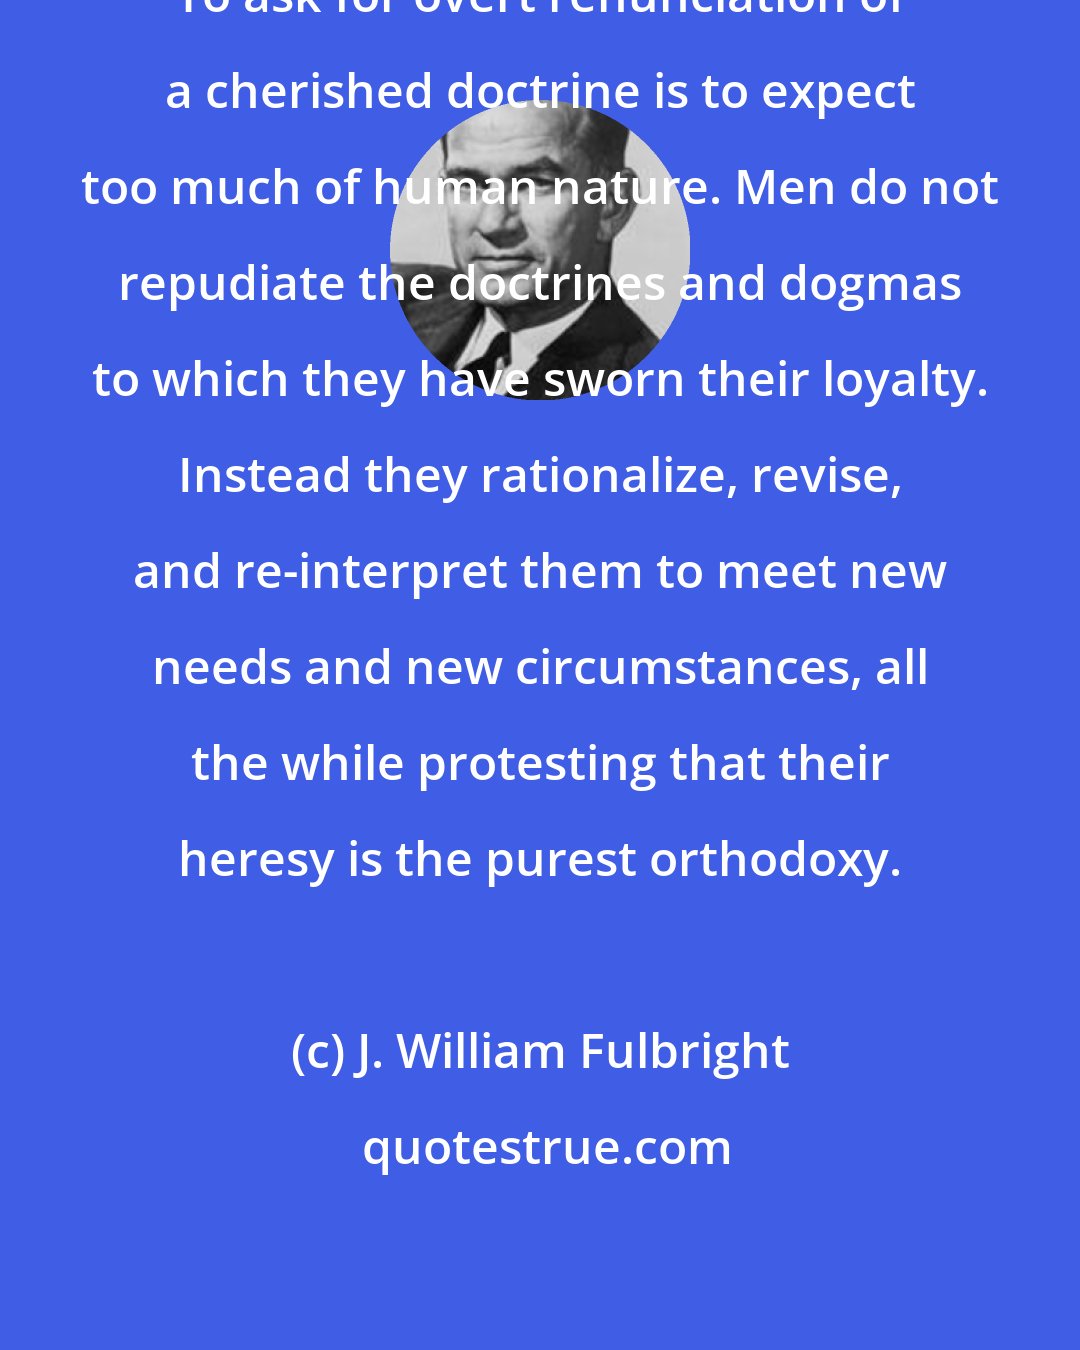 J. William Fulbright: To ask for overt renunciation of a cherished doctrine is to expect too much of human nature. Men do not repudiate the doctrines and dogmas to which they have sworn their loyalty. Instead they rationalize, revise, and re-interpret them to meet new needs and new circumstances, all the while protesting that their heresy is the purest orthodoxy.